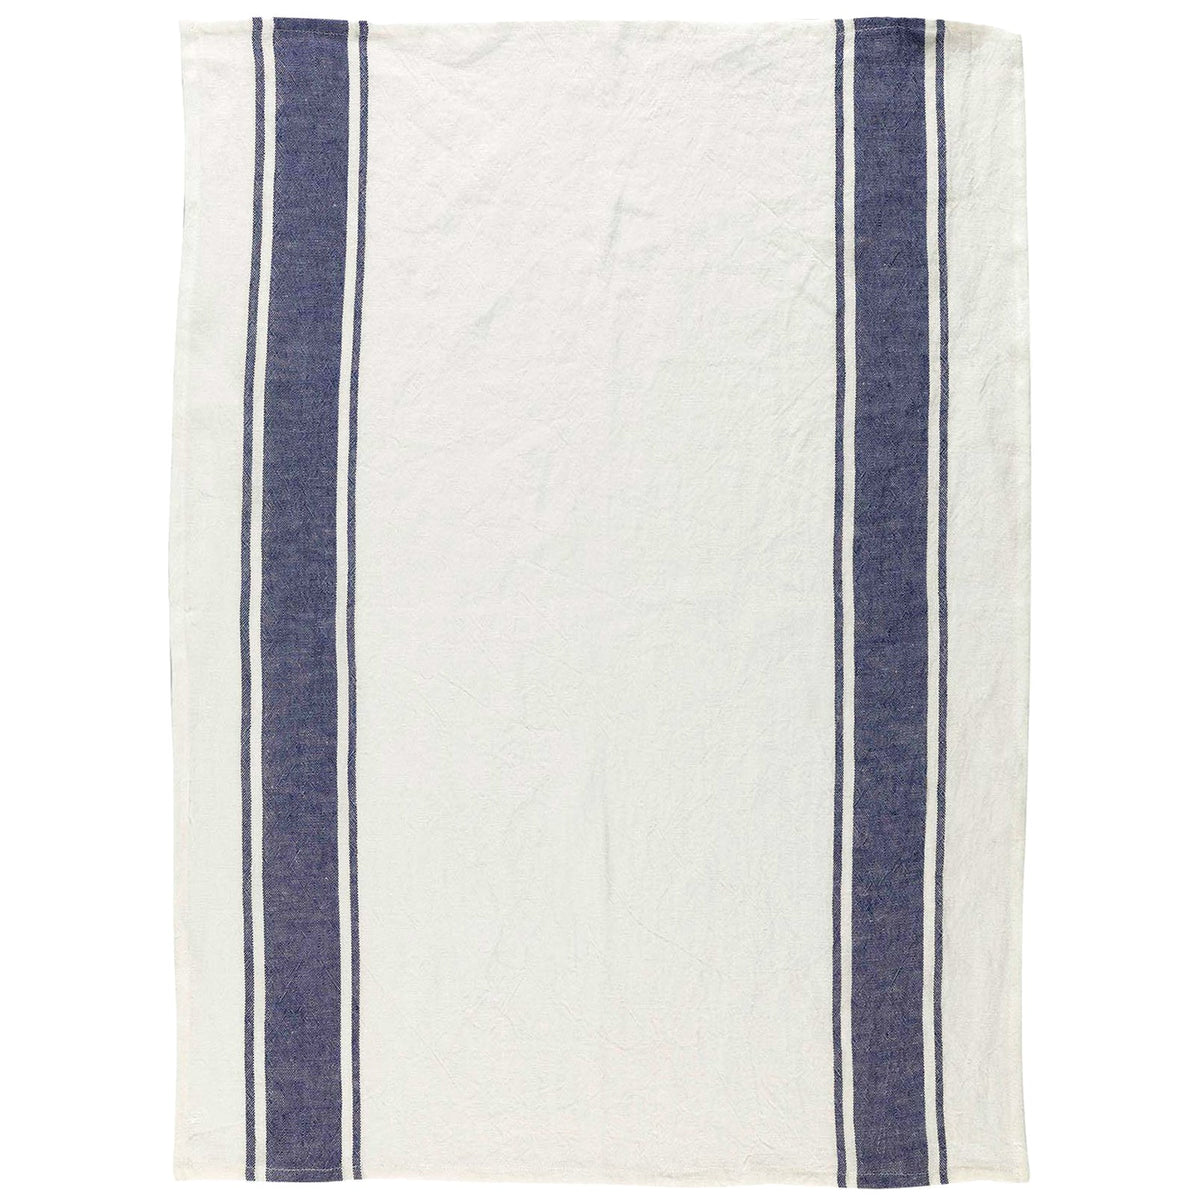 A Trattoria Blue Linen Kitchen Towels Set/2 by TTT, with white and blue stripes on a white background.